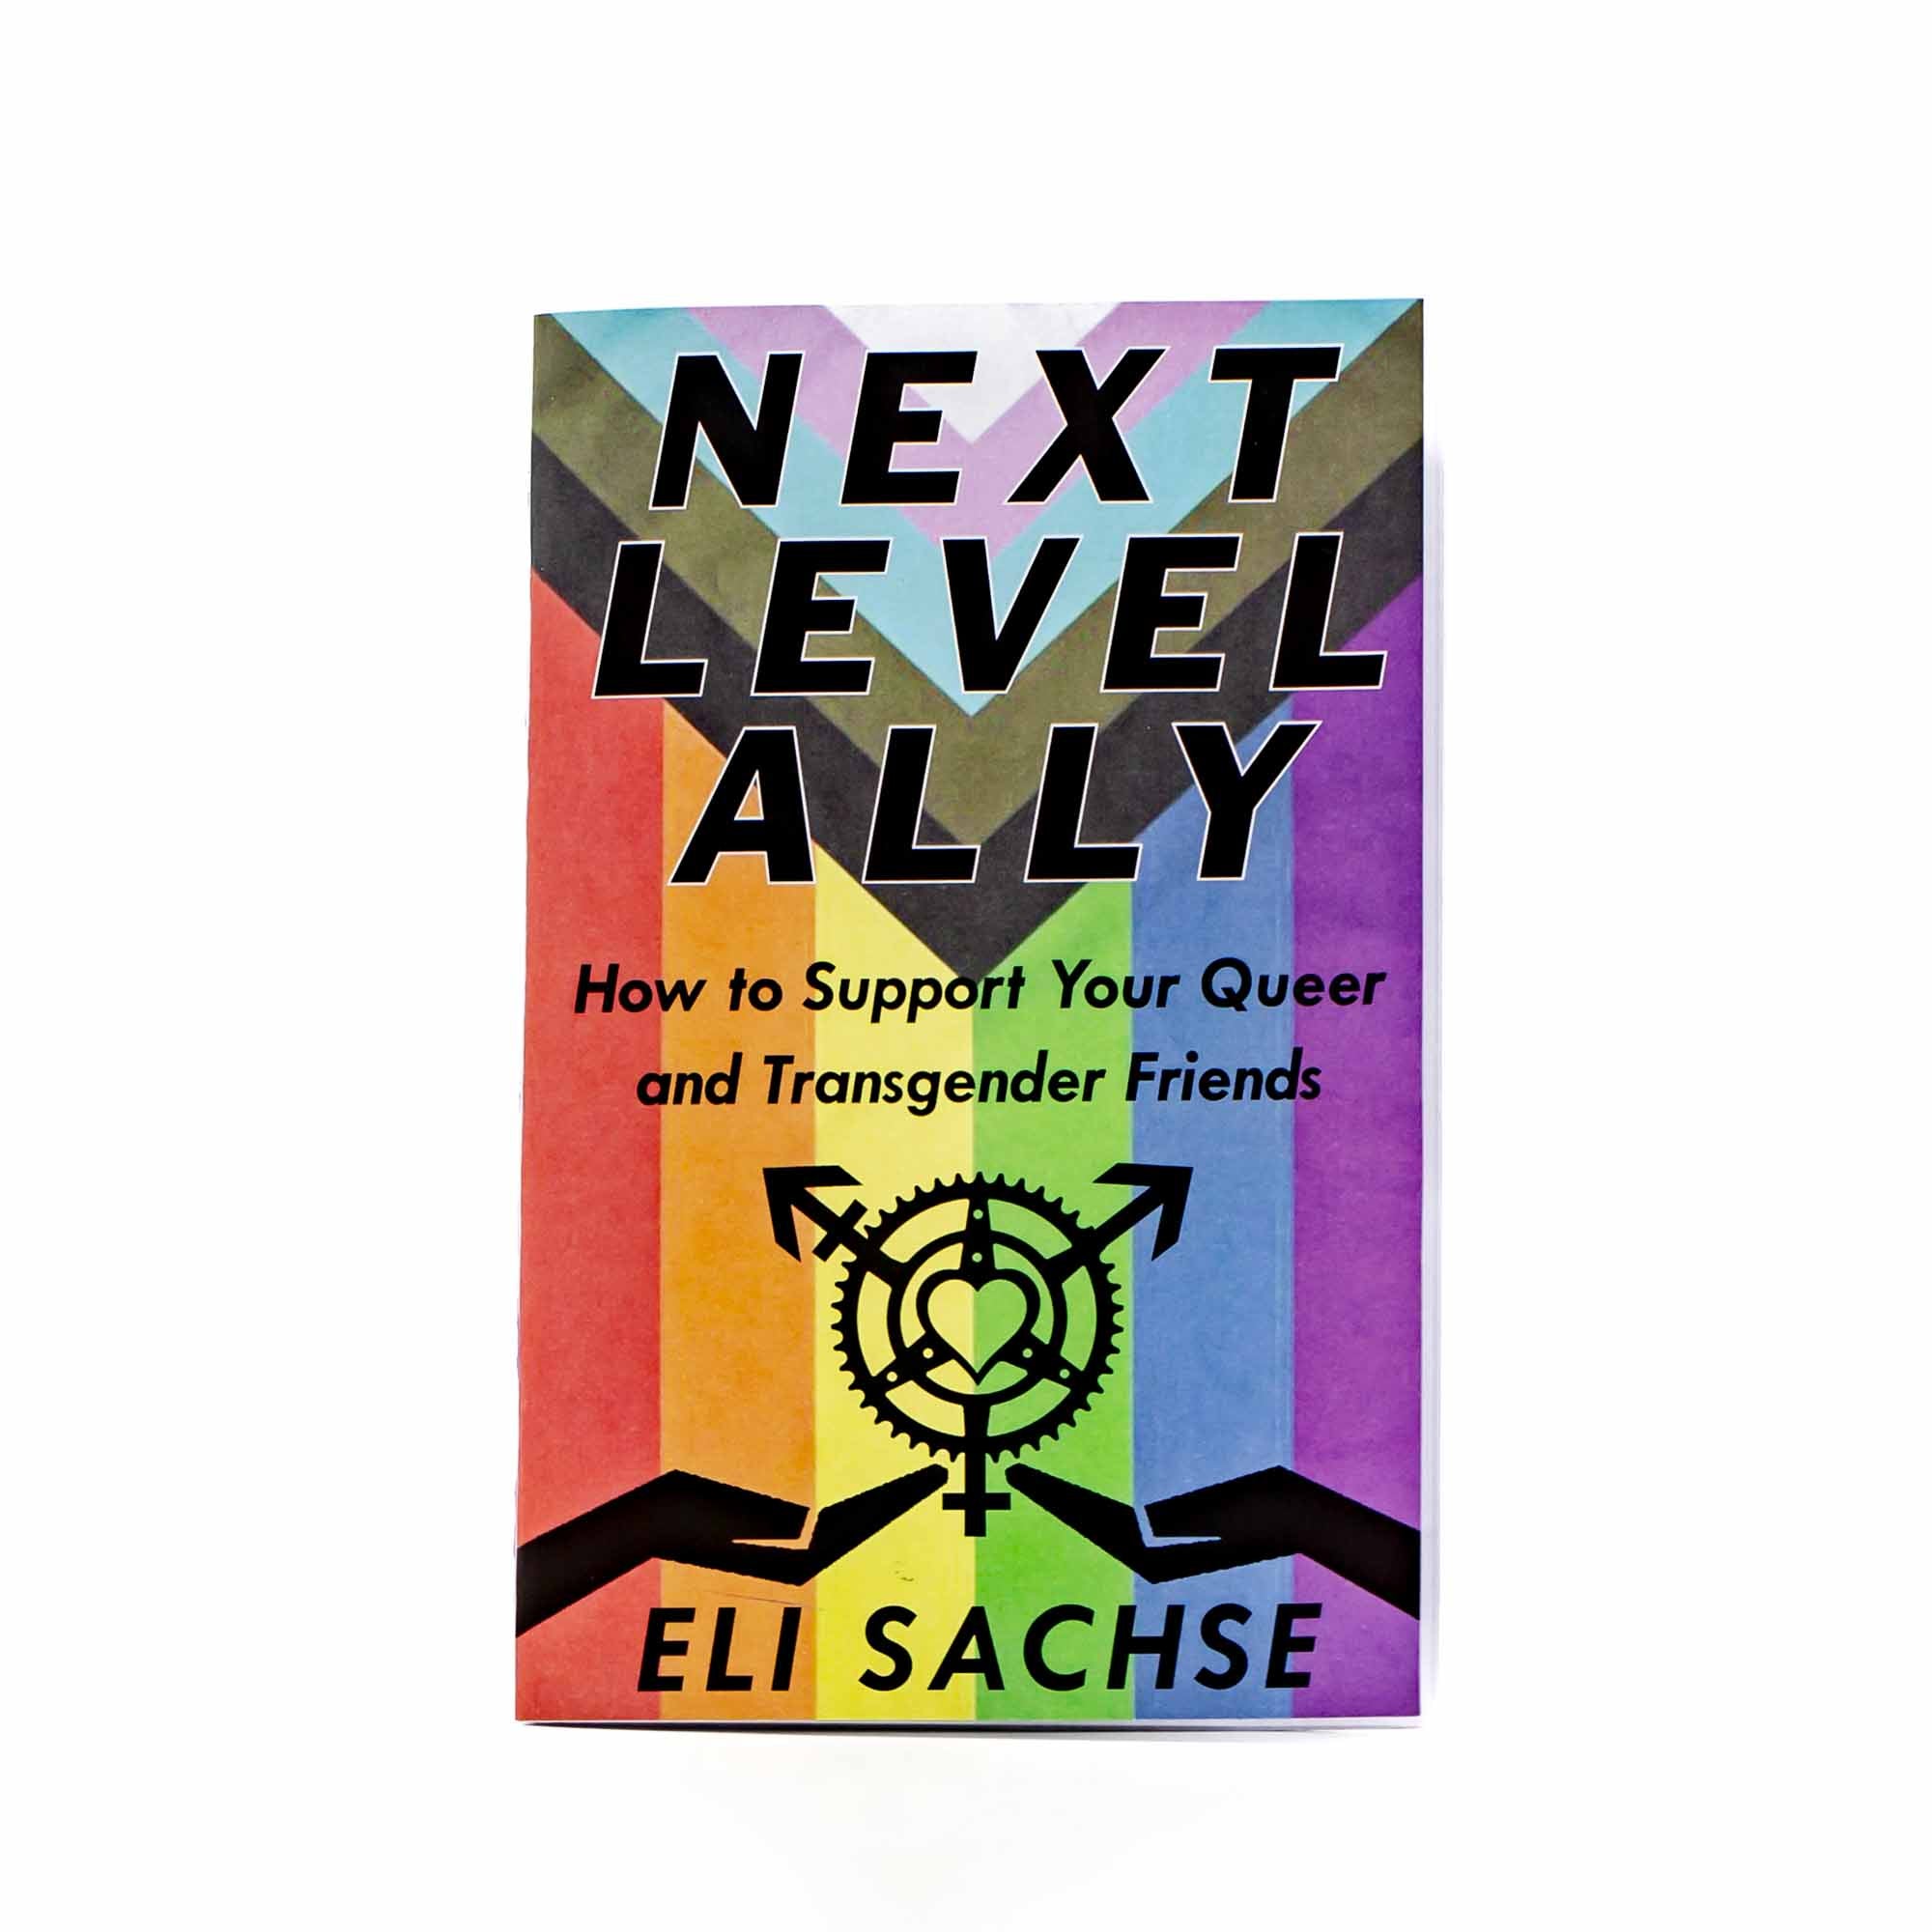 Next Level Ally by Eli Sachse - Mortise And Tenon